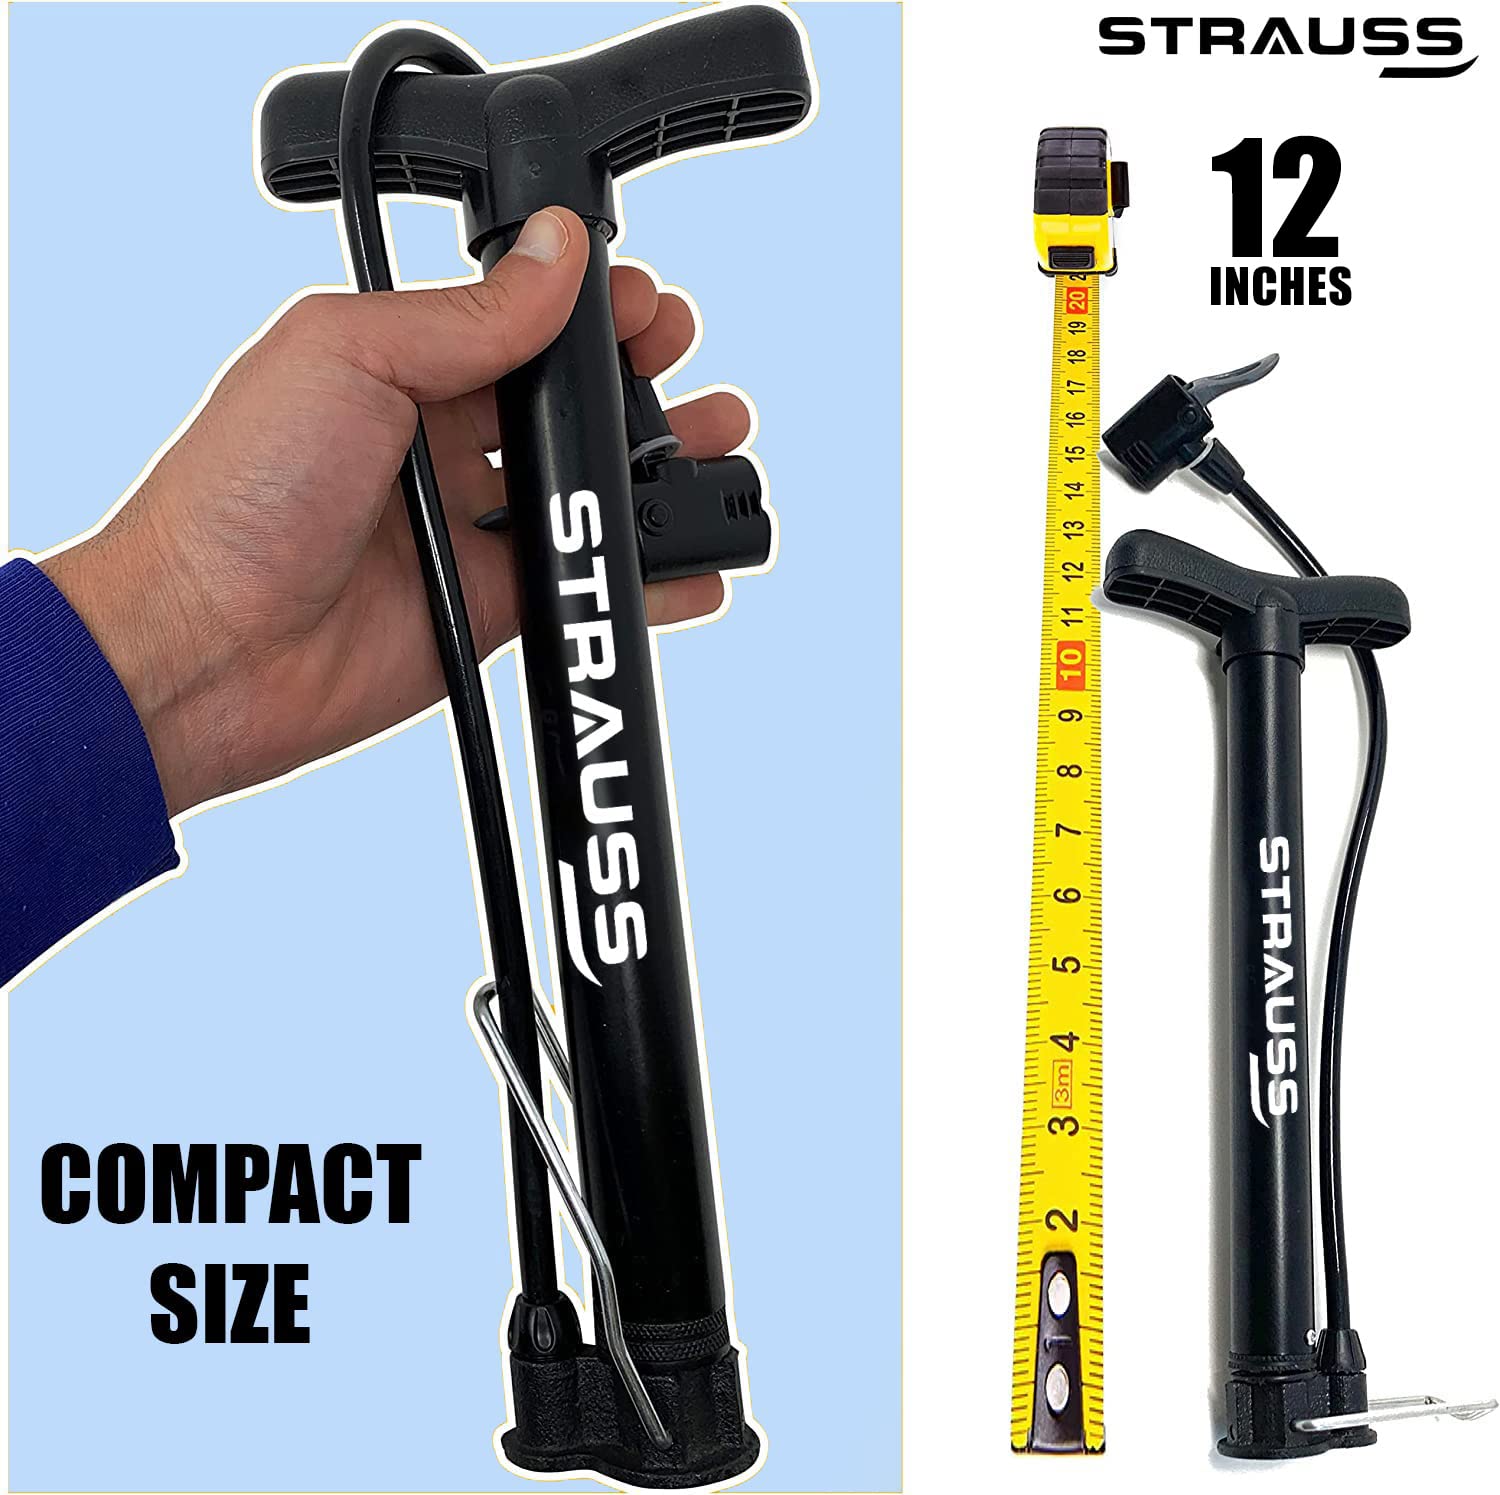 Strauss Bicycle Air Pump with Needle & Dual Valve | Portable Pump with 2 Modes, Ideal for Inflating Bicycle, Swimming Rings | Sturdy Base & Ergonomic Handle (Navy Blue)